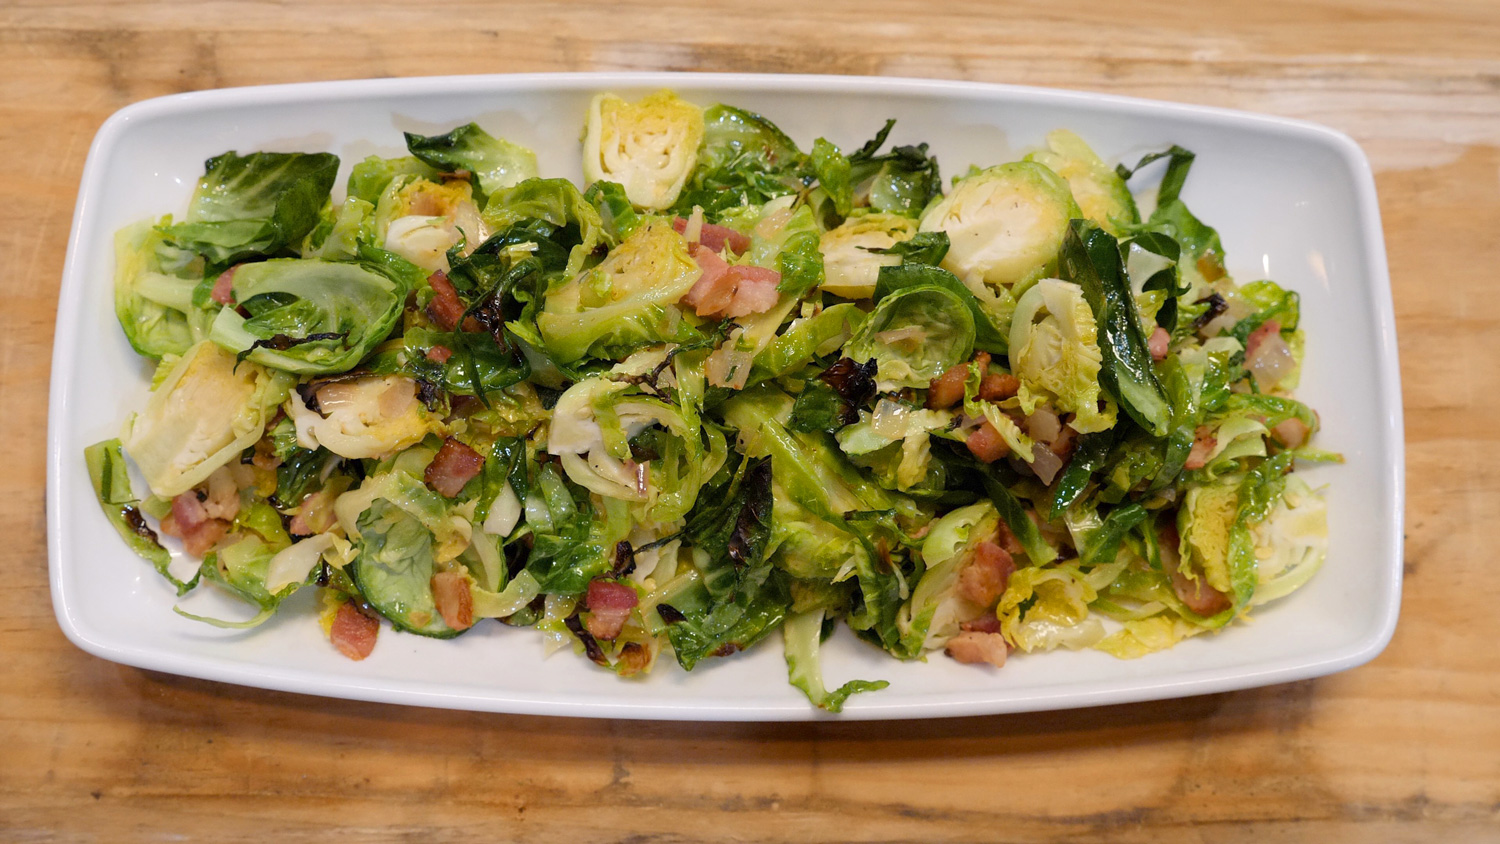 Brussels Sprouts dish